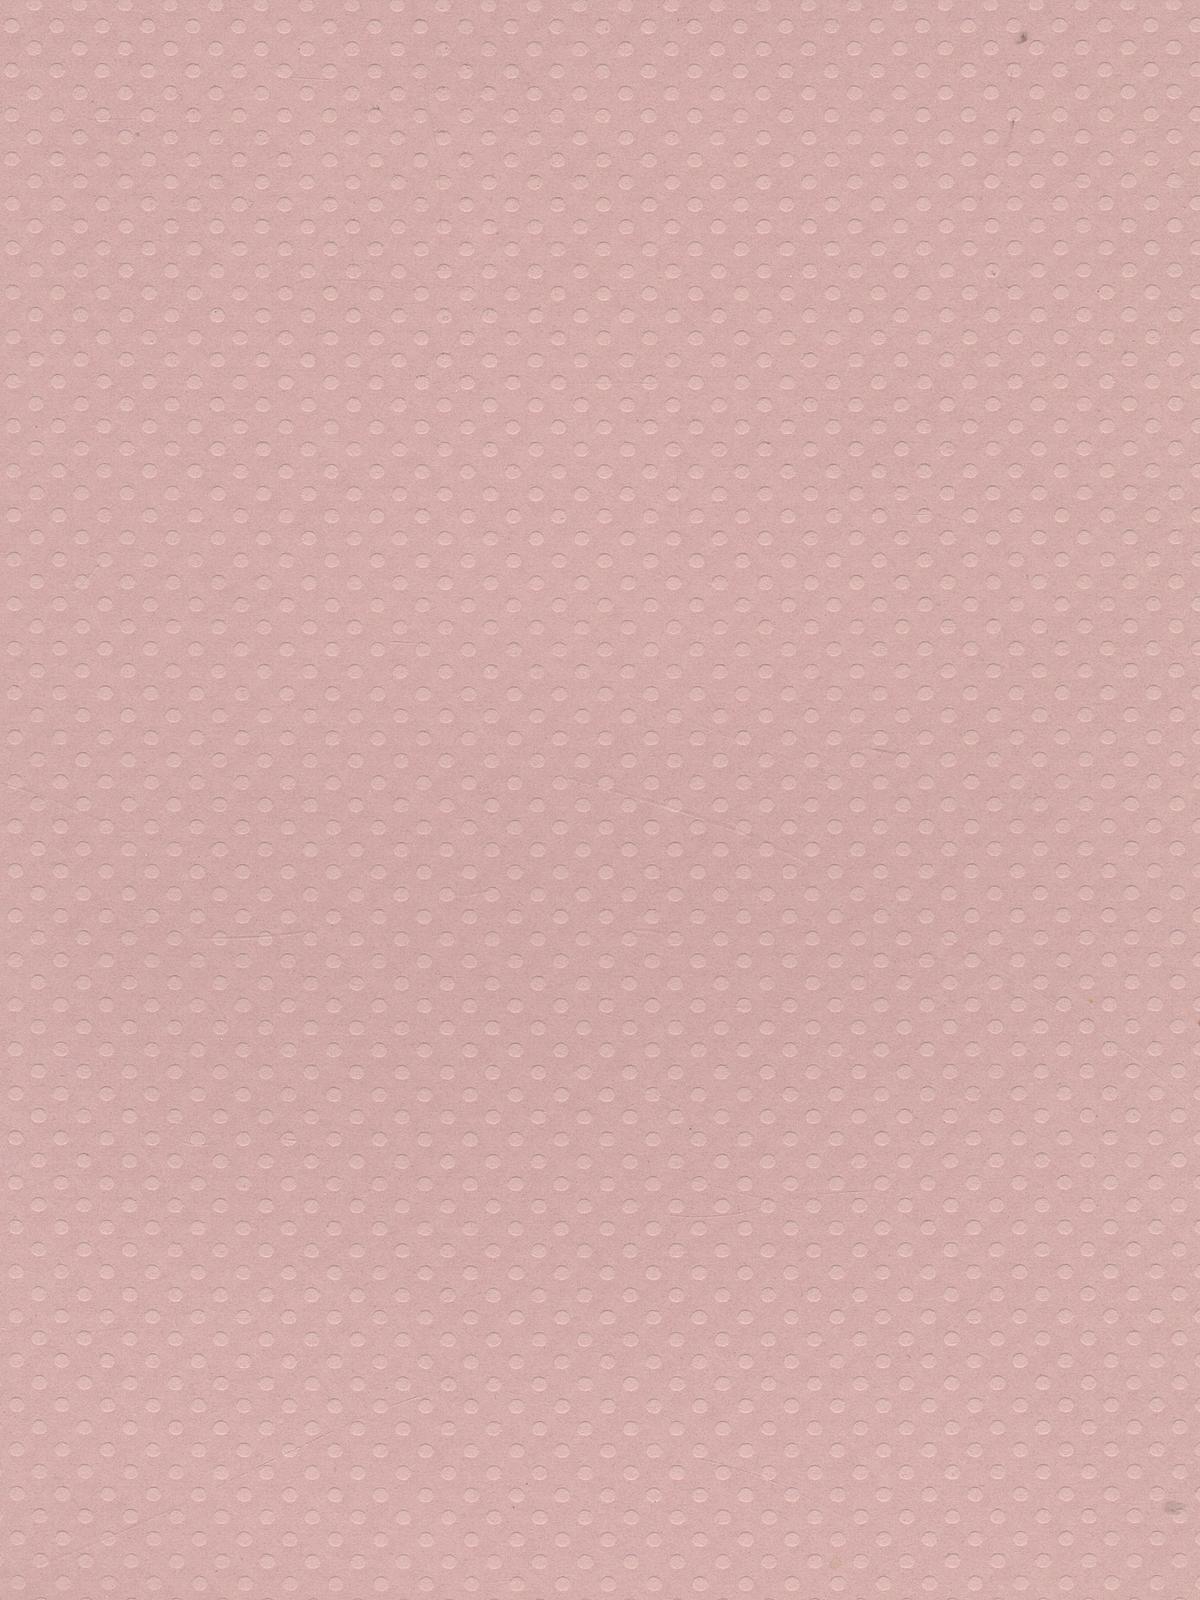 Dotted Swiss 80 Lb. Cardstock 8 1 2 In. X 11 In. Sheet Sunset Rose